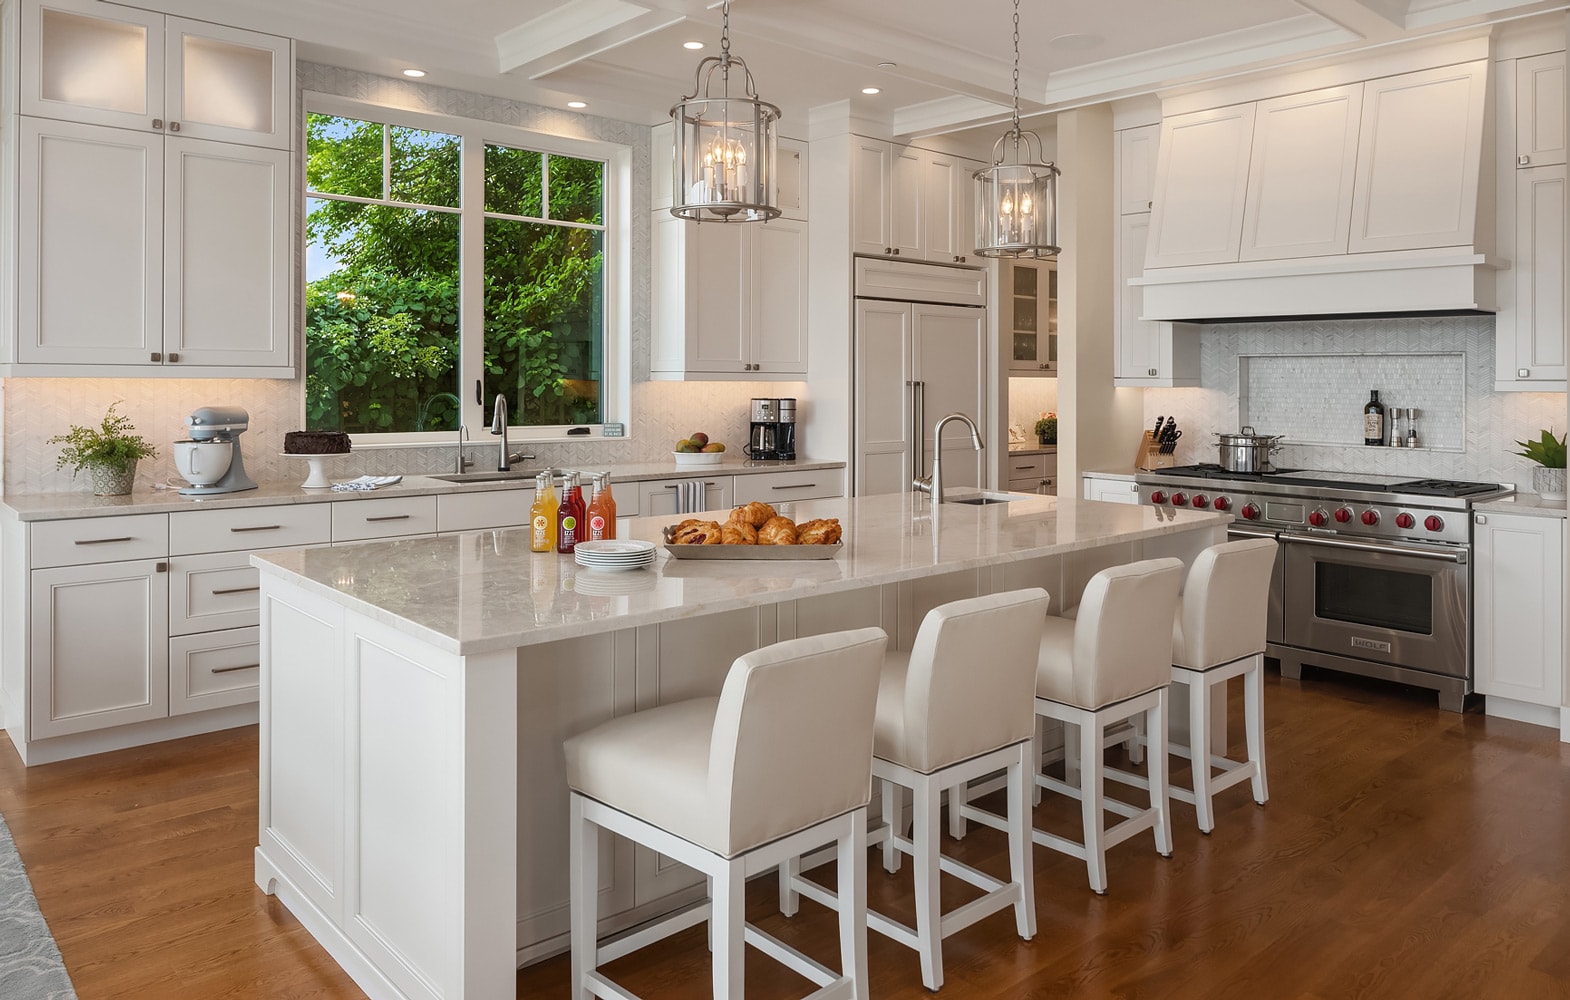 Designing a Dream Kitchen-With Durable Solutions